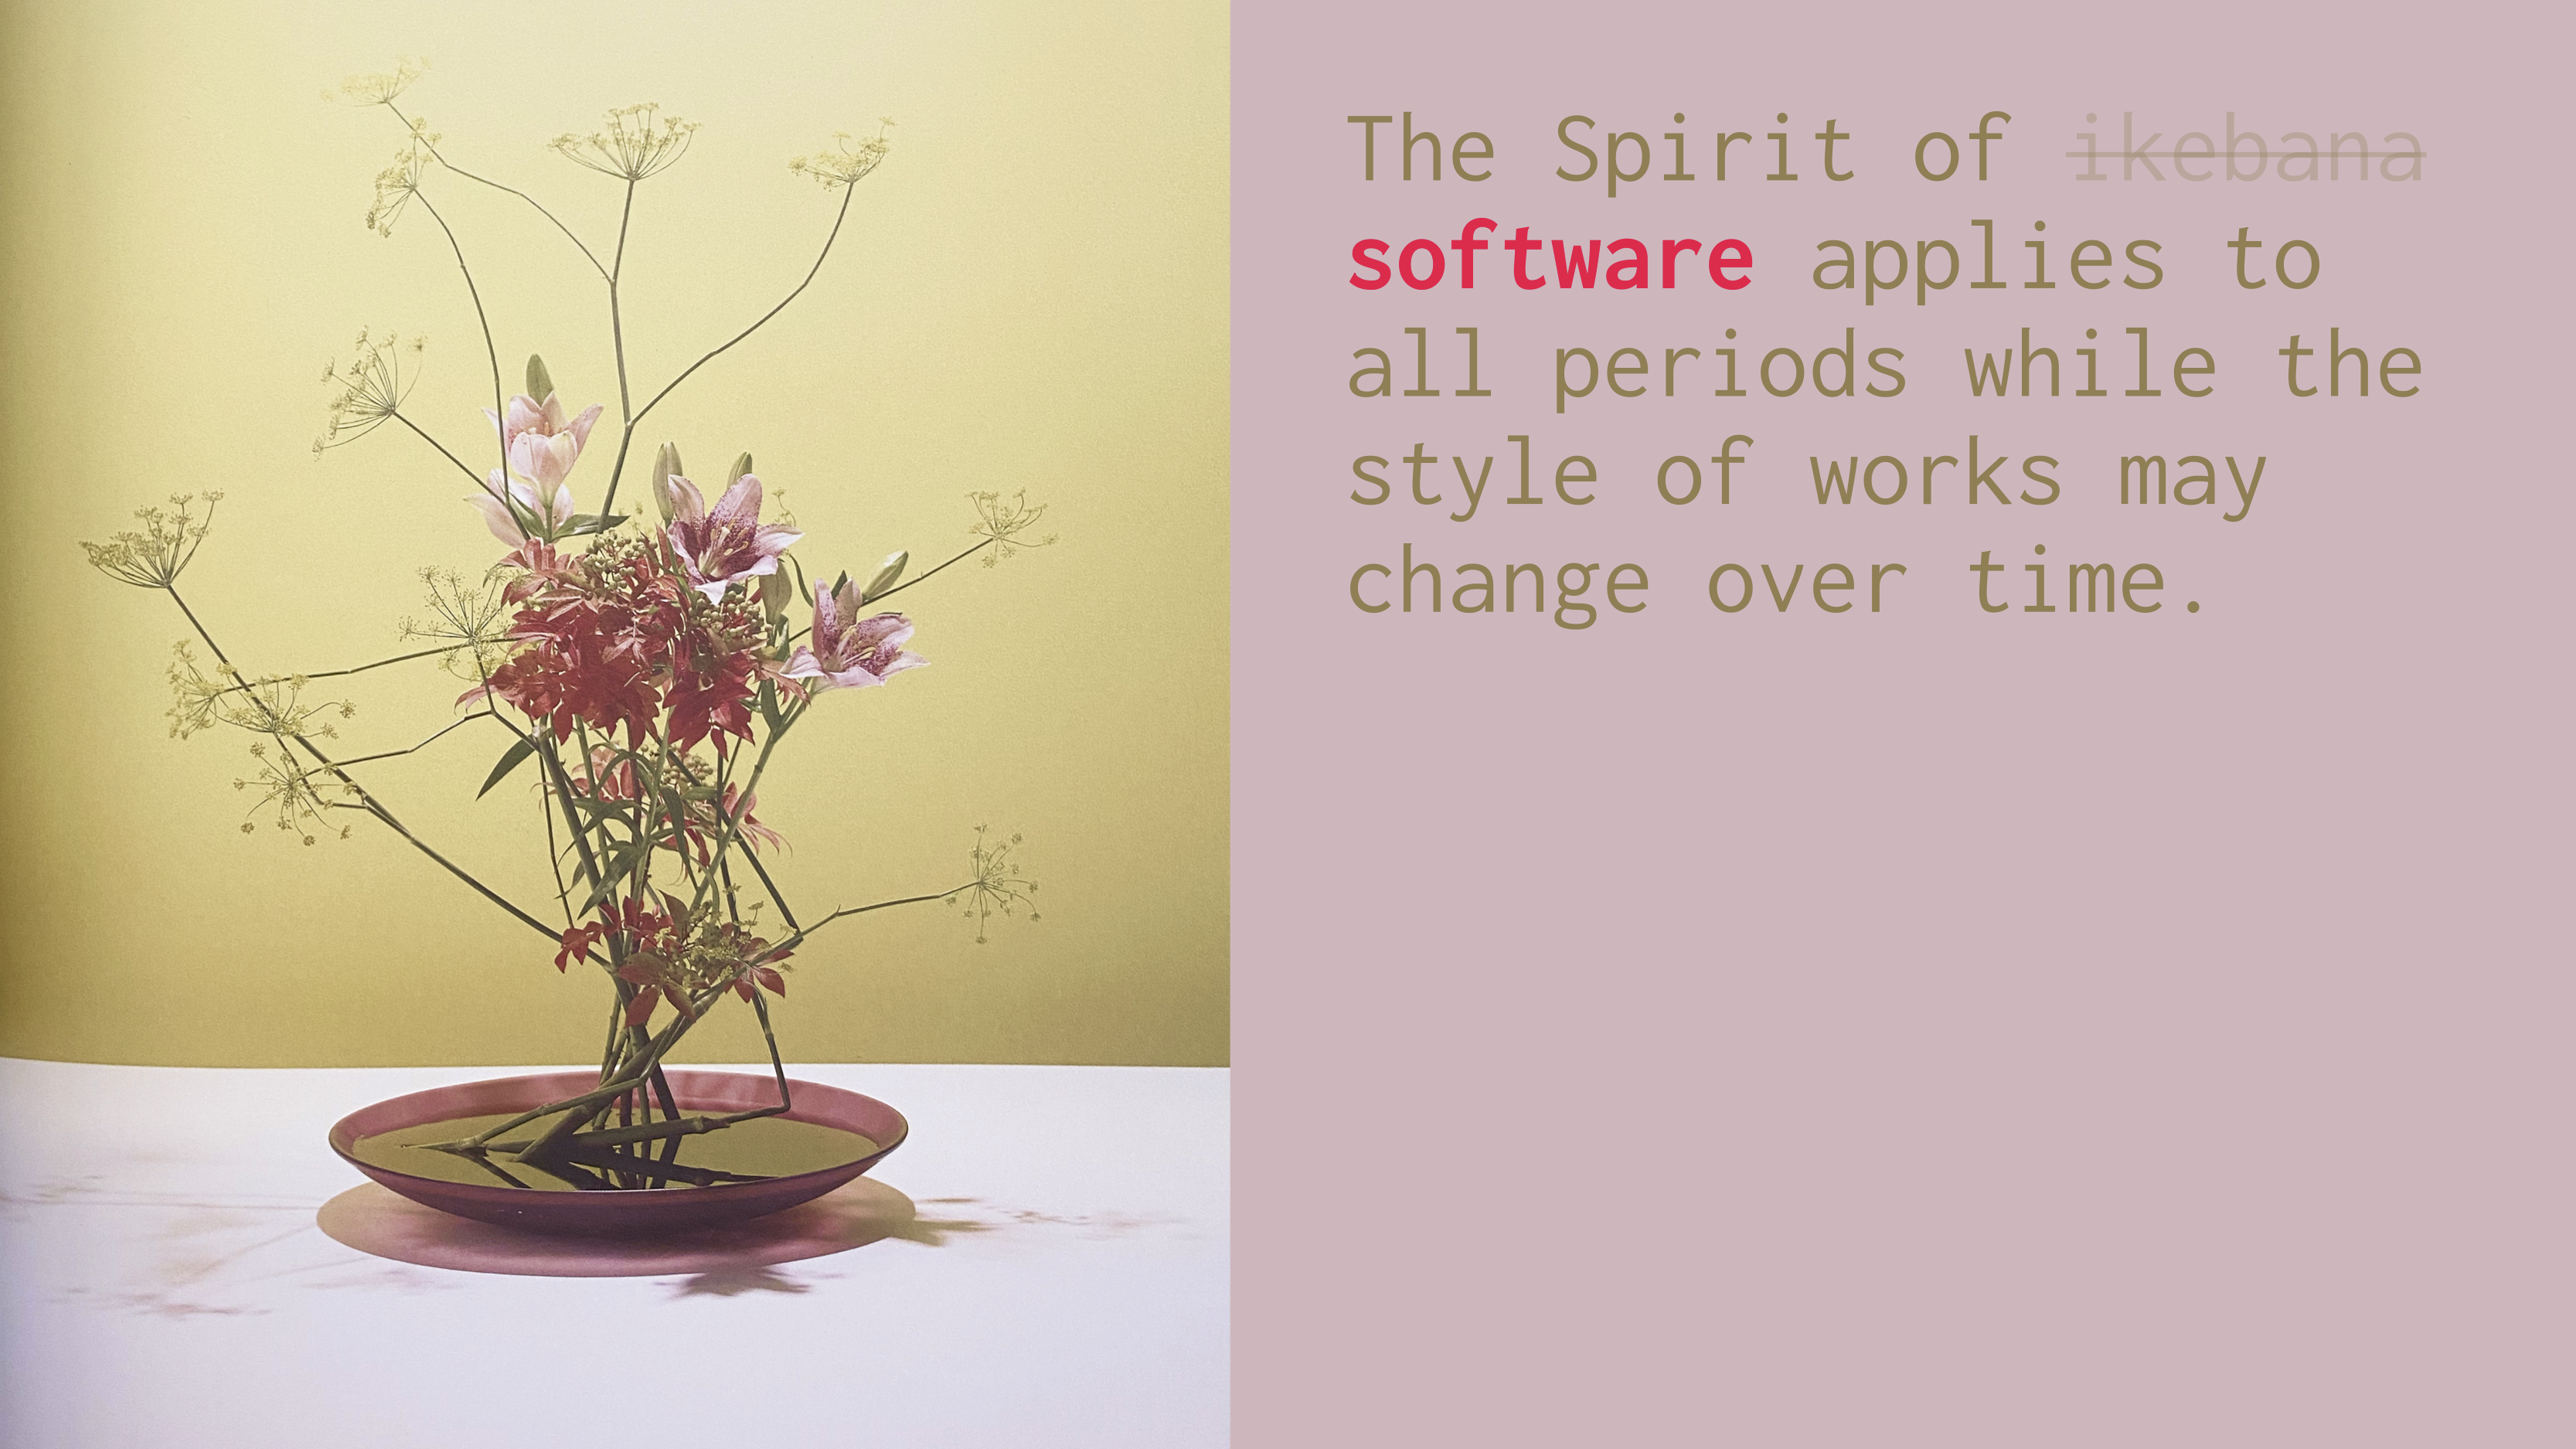 Ikebana arrangement next to some text that reads, “The Spirit of software applies to all periods while the style of works may change over time.”